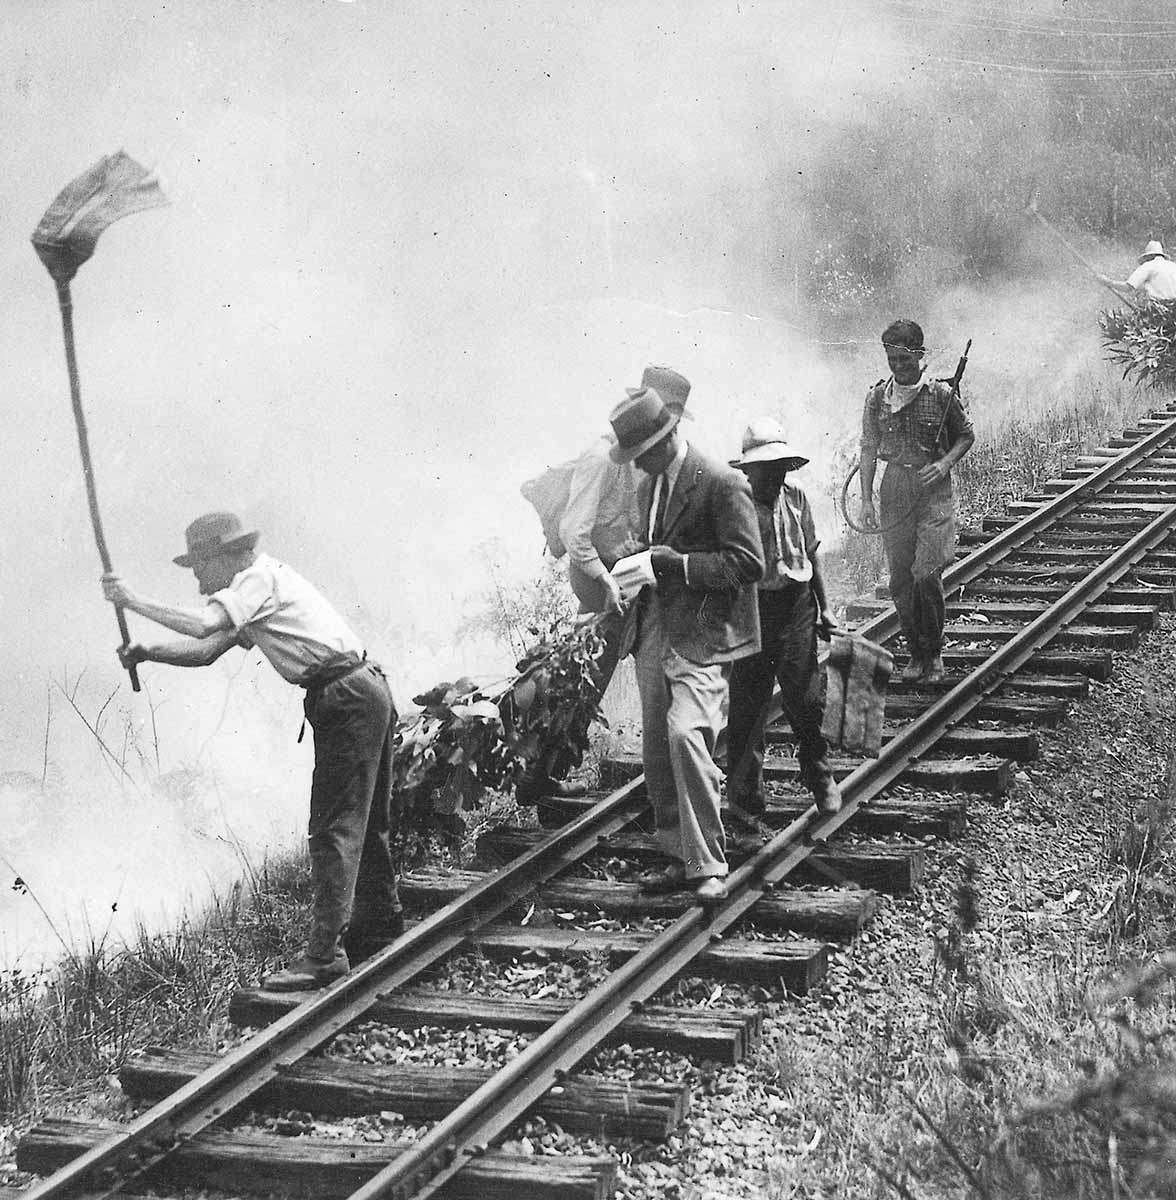 Black and white photograph of men fighting fires along rail track